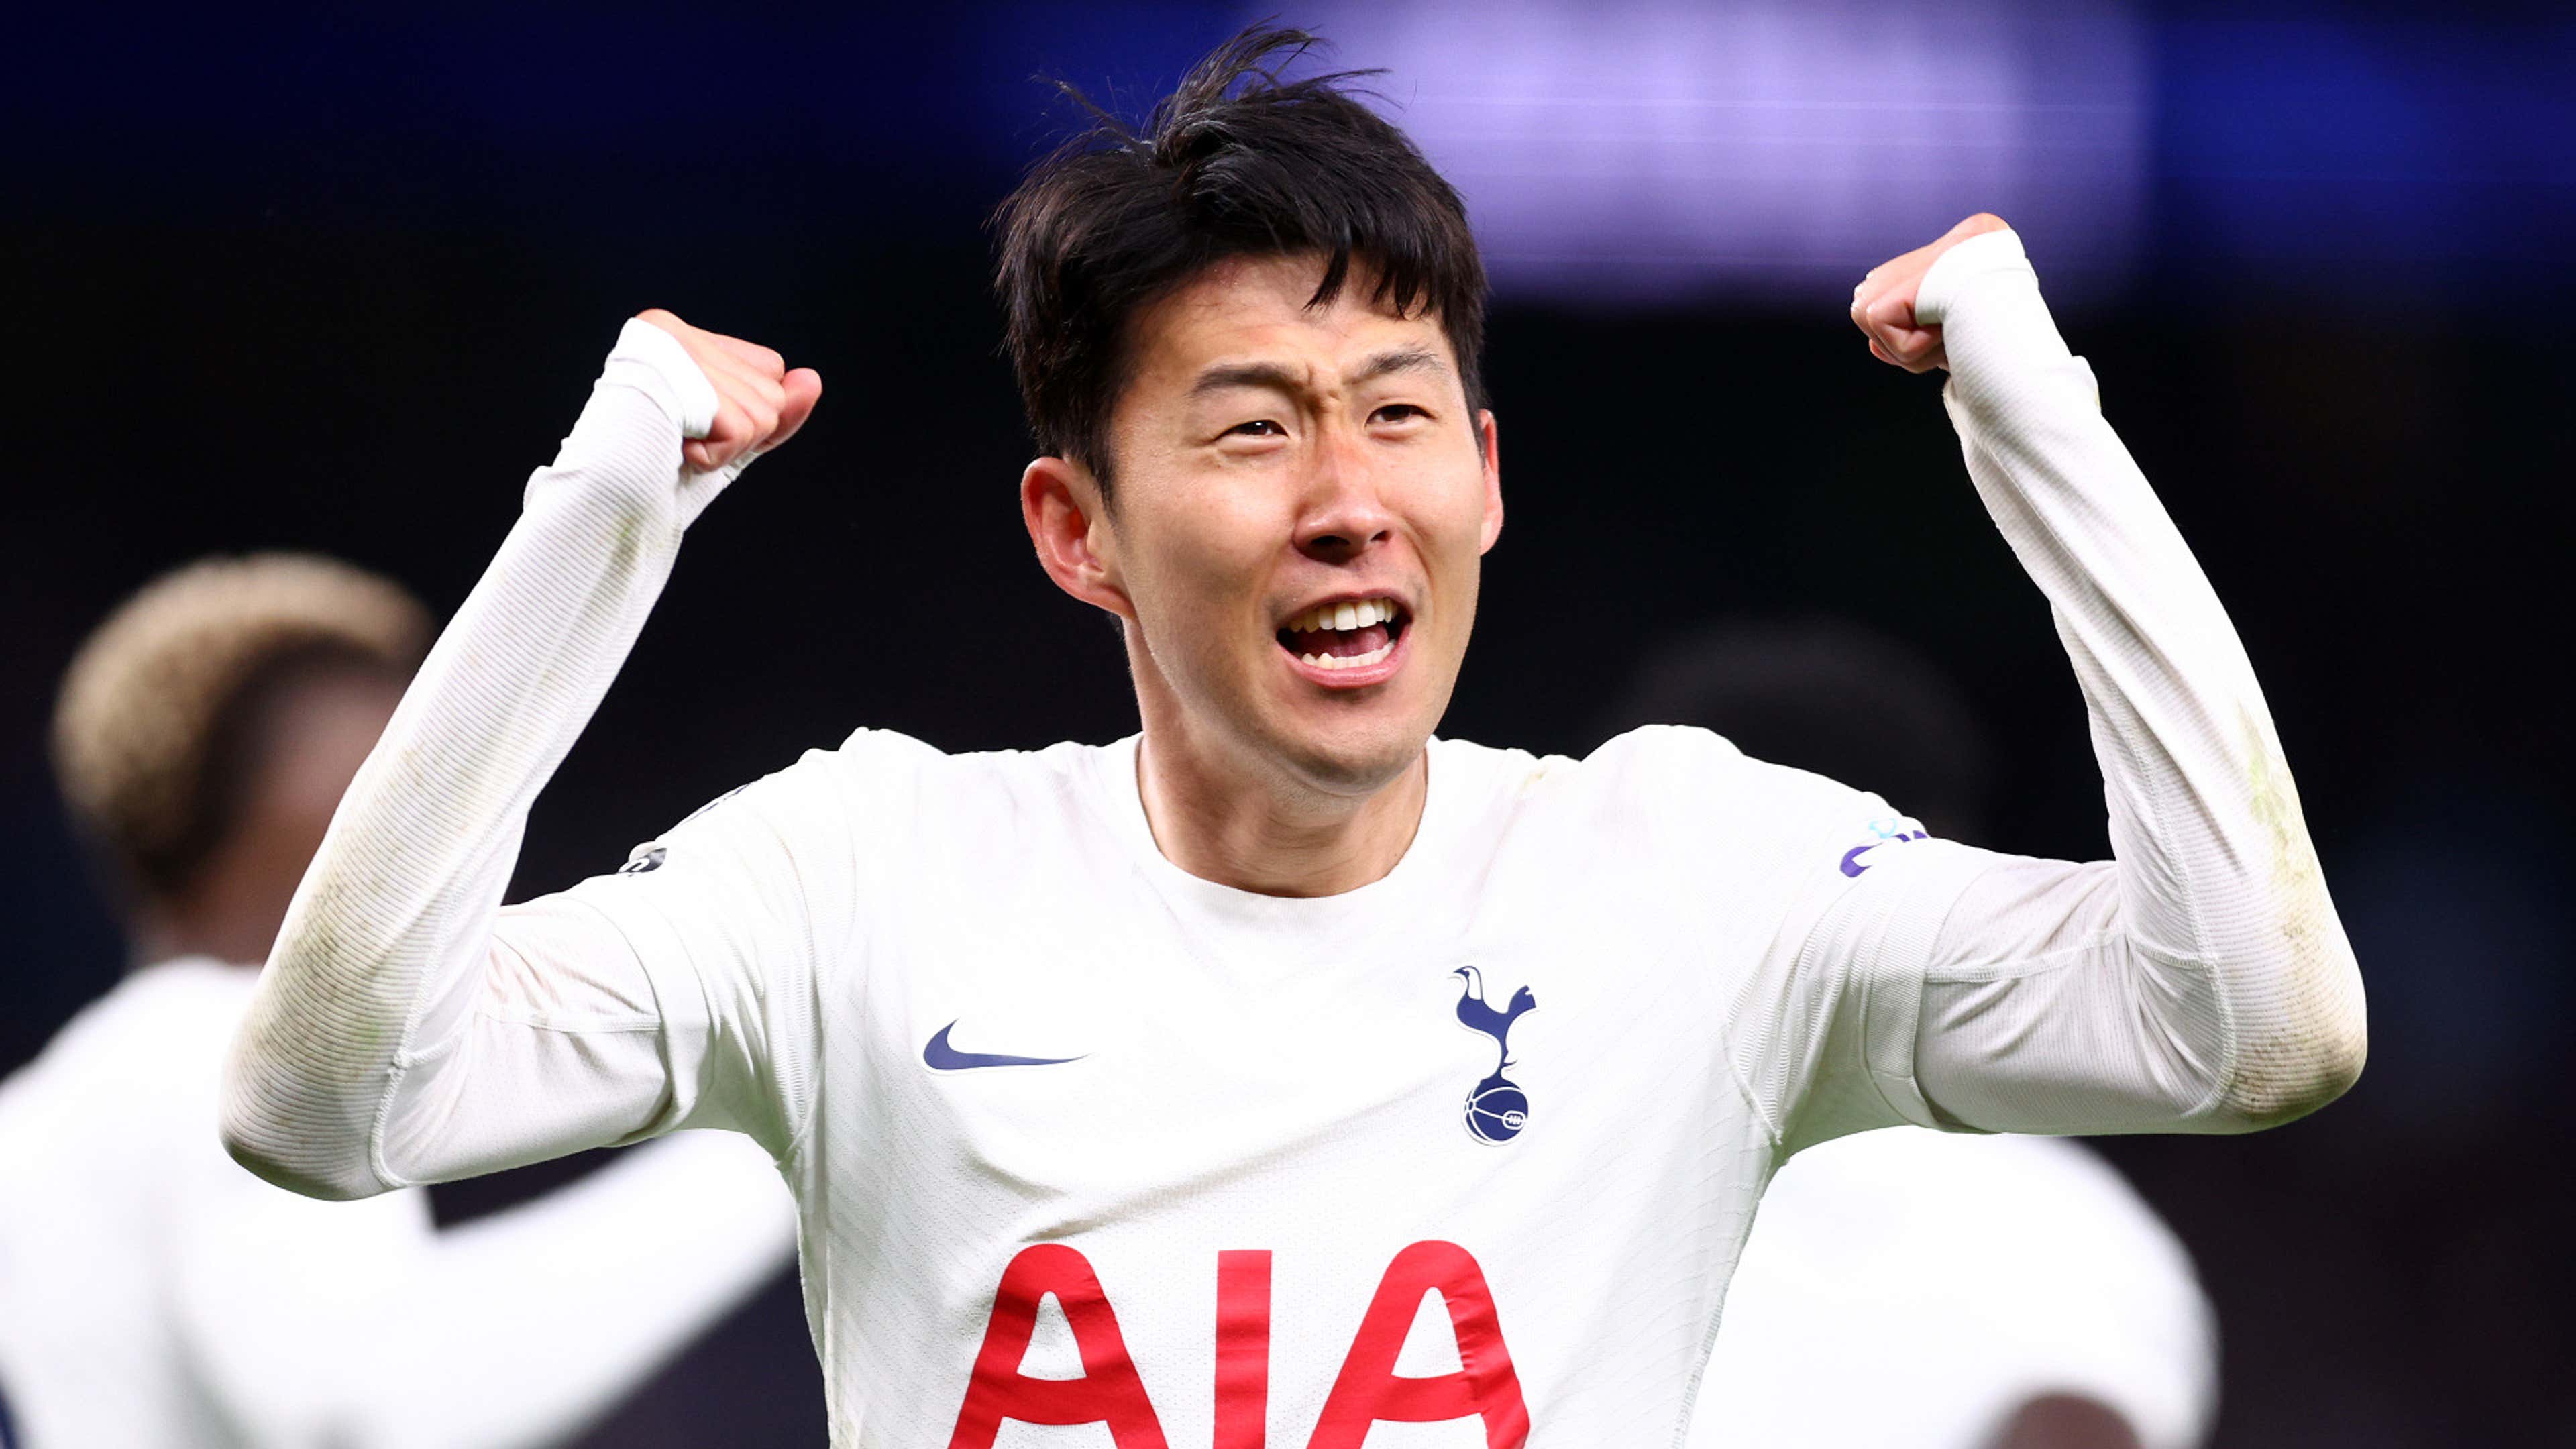 Vietnam defender gets autograph of Son Heung-min after game